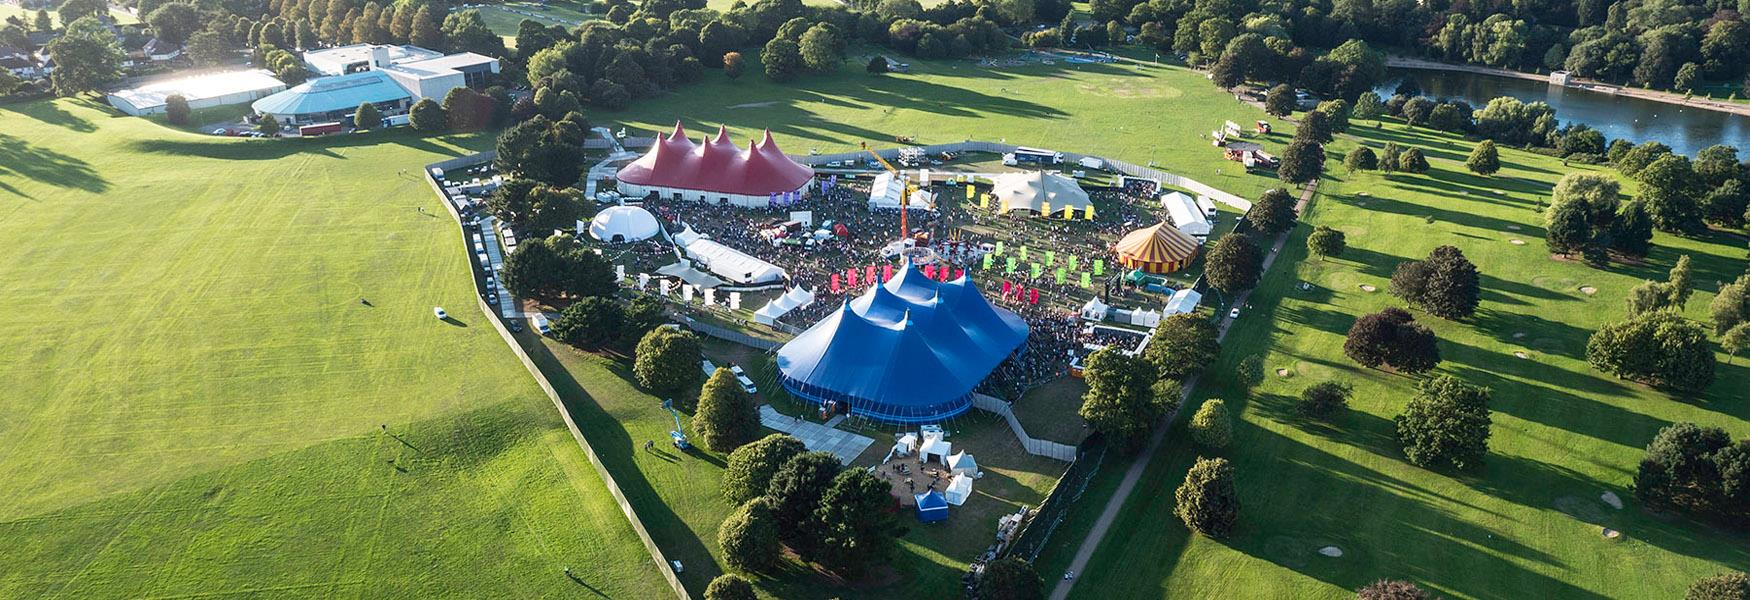 Aerial view of a Festival in Mote Park